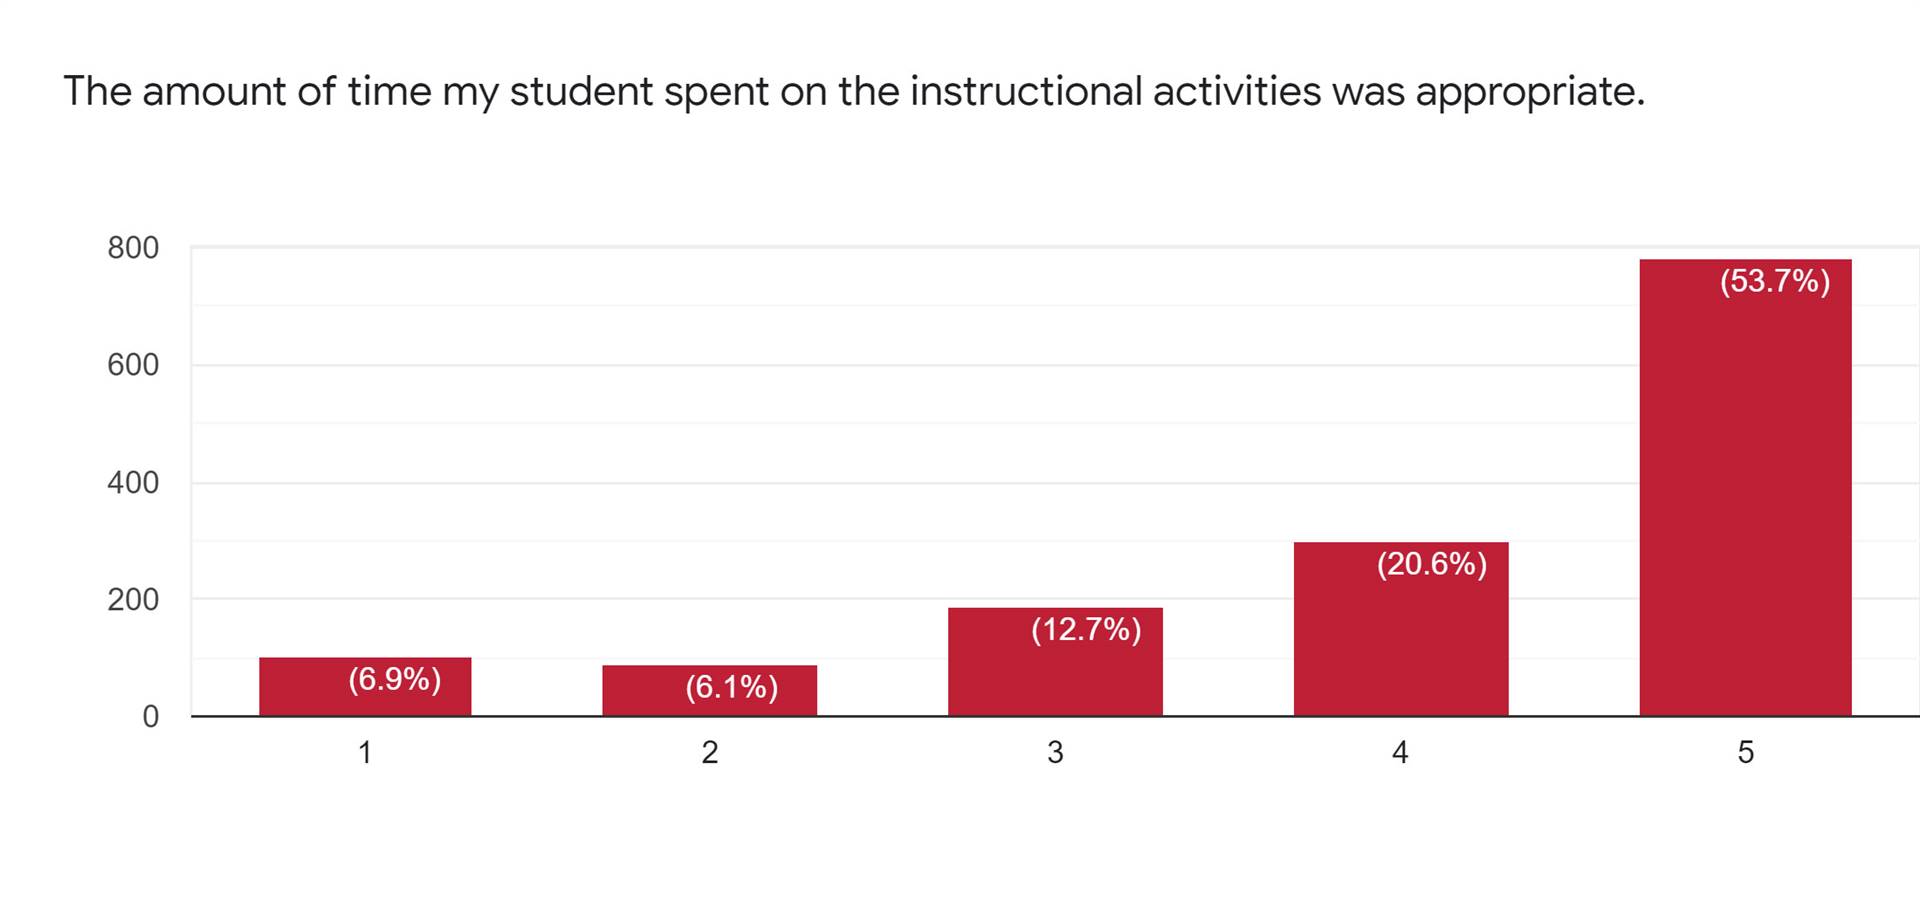 FID Survey Slide 4 - "The amount of time my student spent on the instructional activities was approp